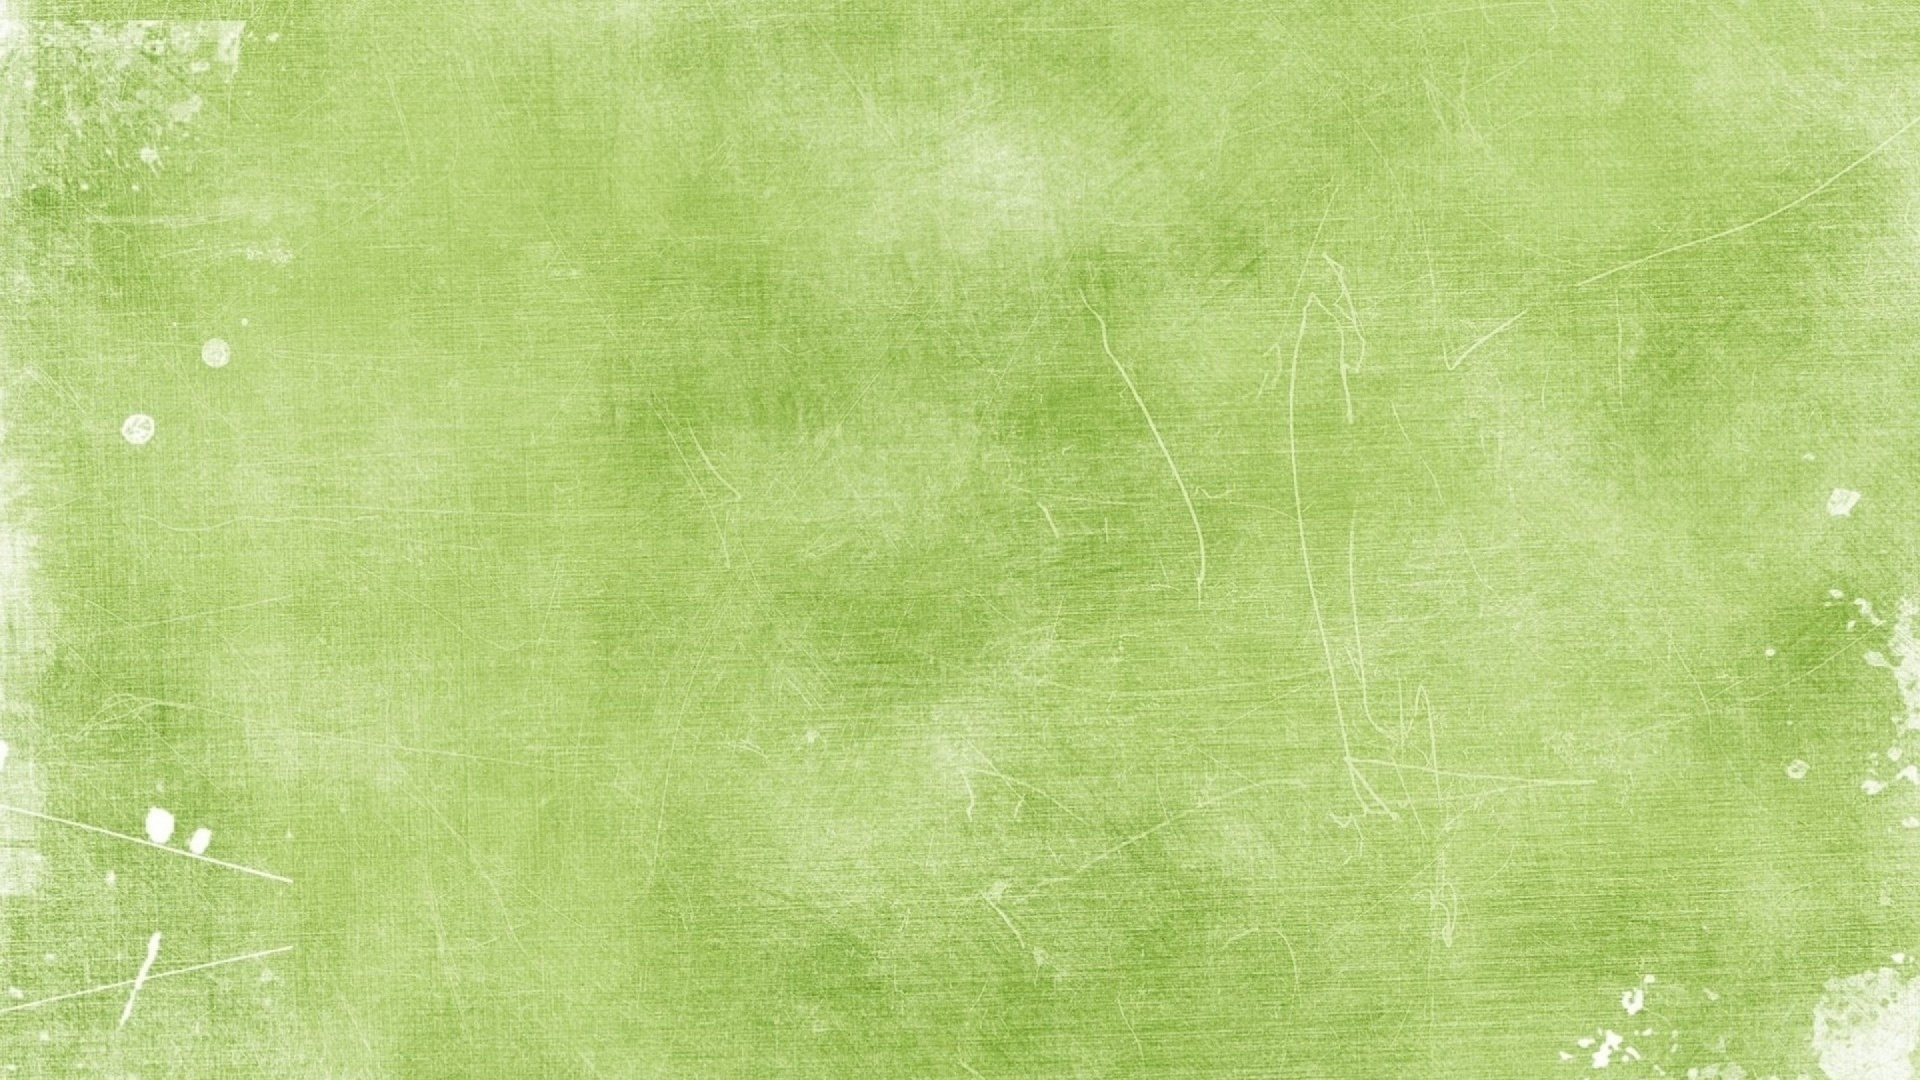 Green Textile on White Textile. Wallpaper in 1920x1080 Resolution